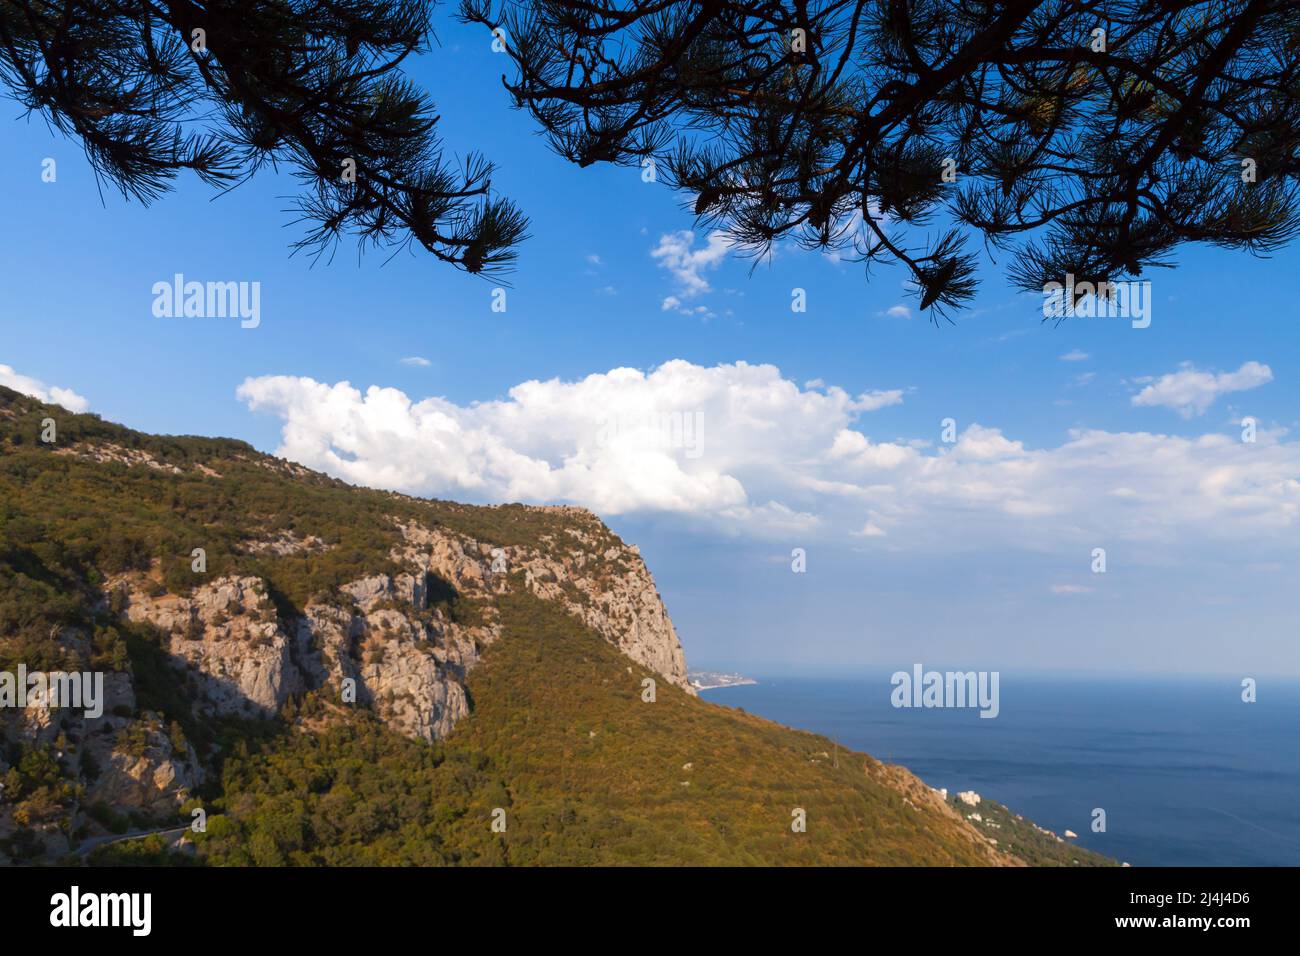 Crimean landscape with Black Sea coast on a sunny day. Pine tree branches silhouettes on a foreground Stock Photo